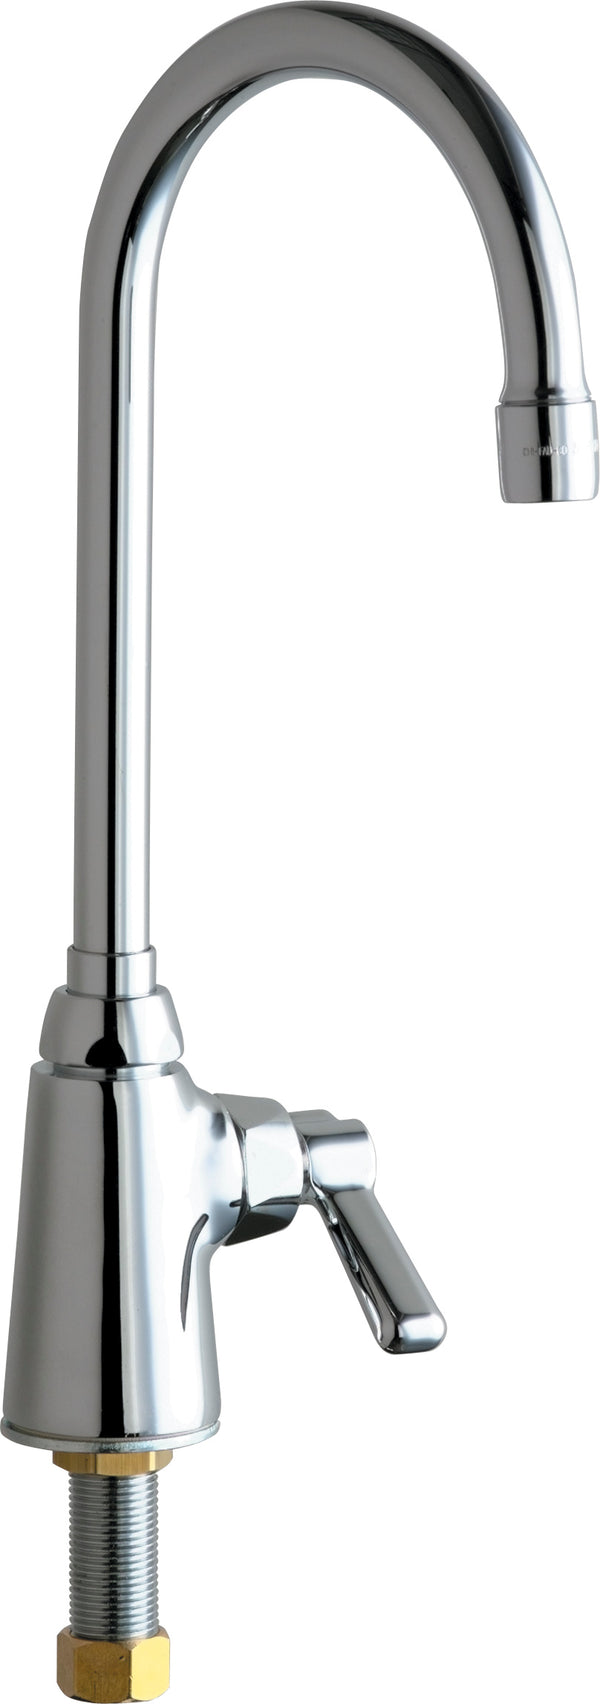 Chicago Faucets Pantry Sink Faucet 350-244ABCP